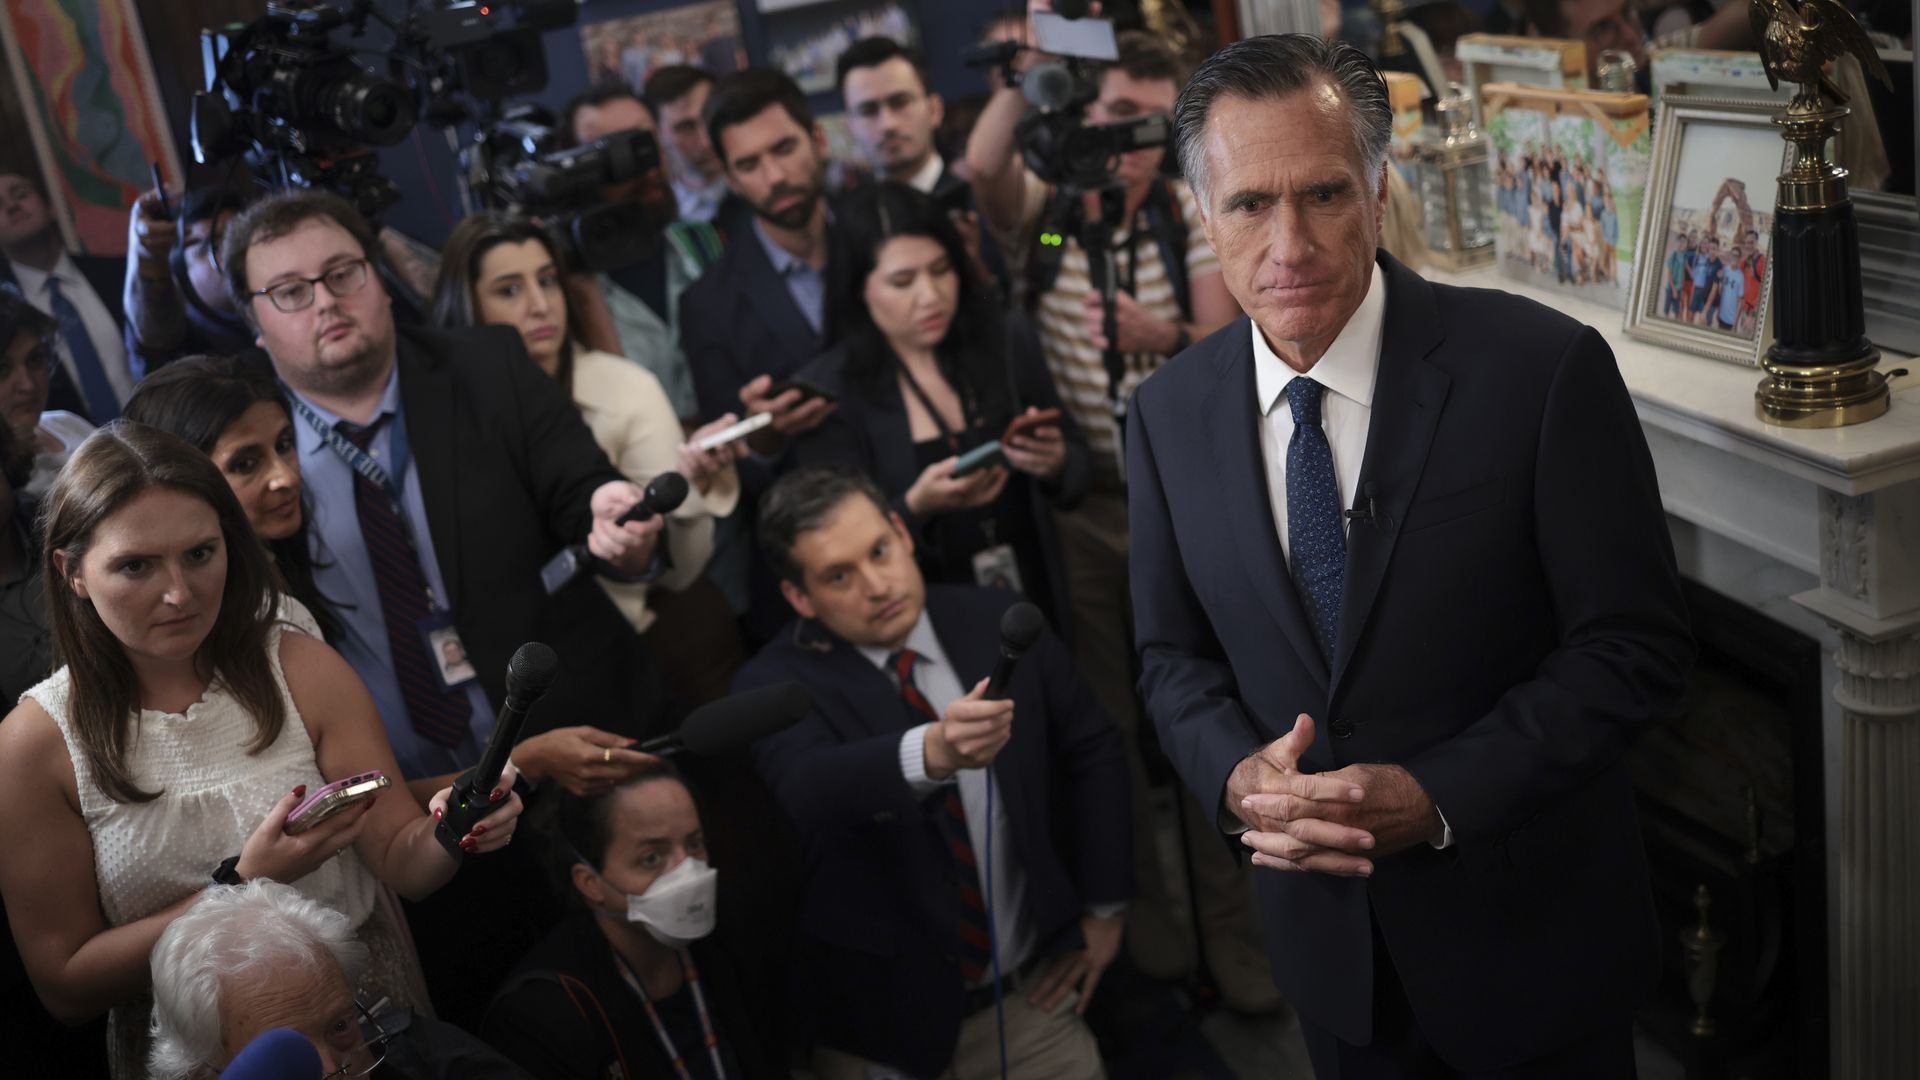 Romney's retirement likely to re-shape GOP candidate field Senate race